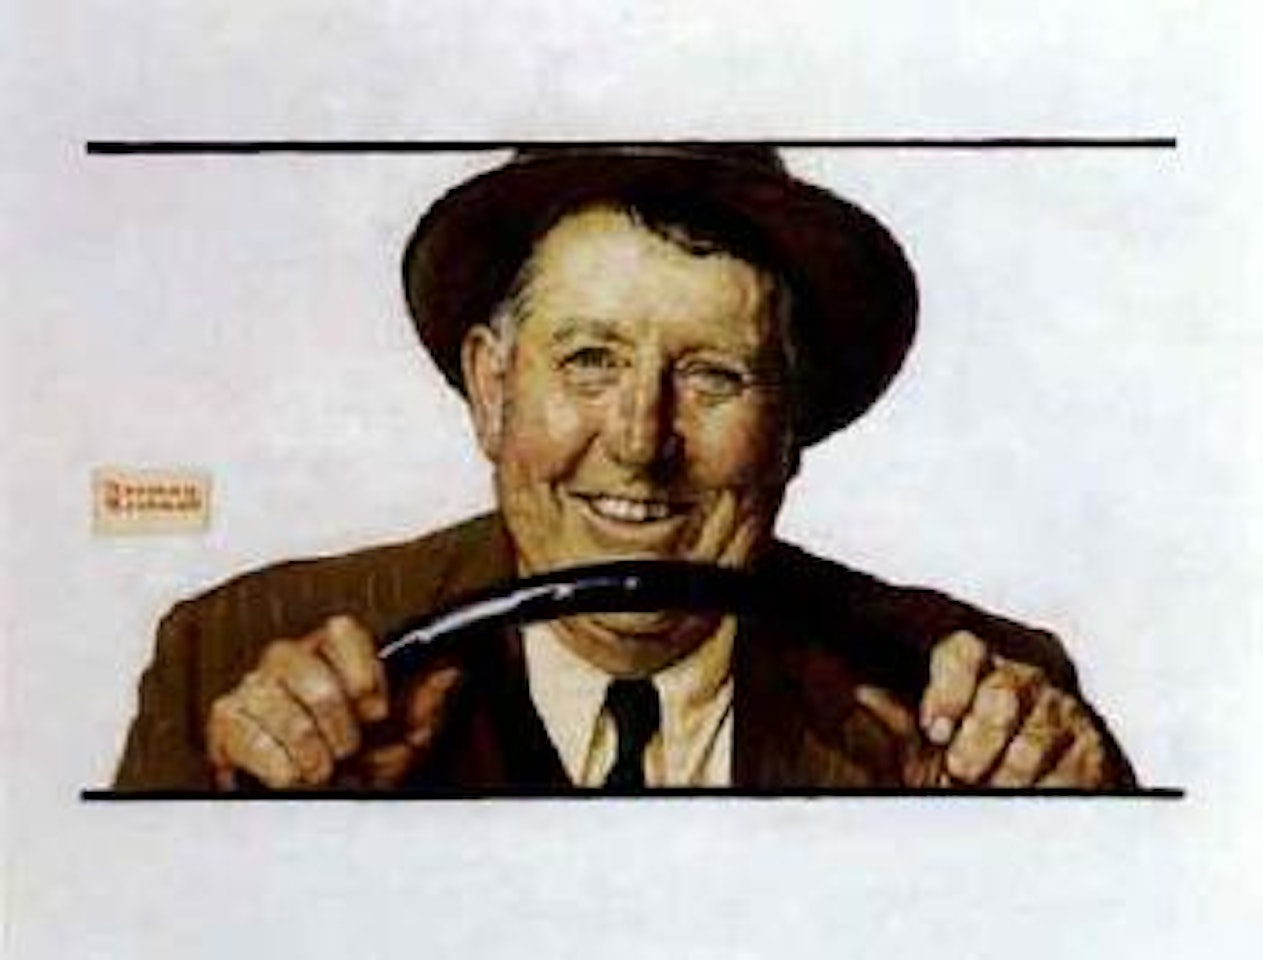 Hop in neighbor by Norman Rockwell